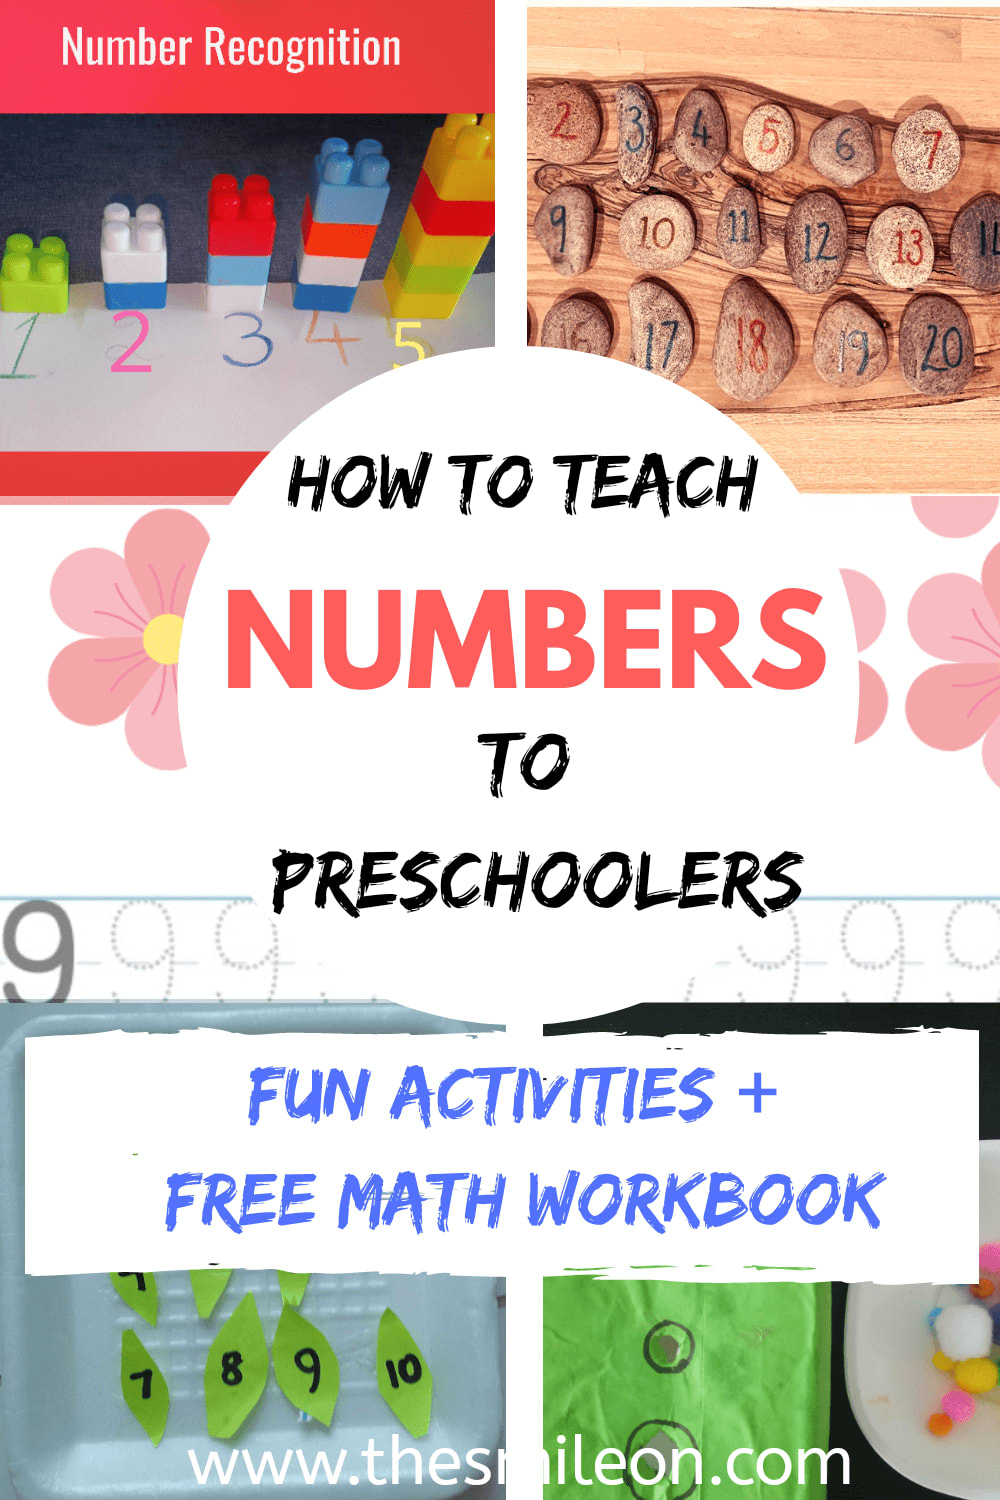 How to teach number Recognition to Preschoolers in a fun way?